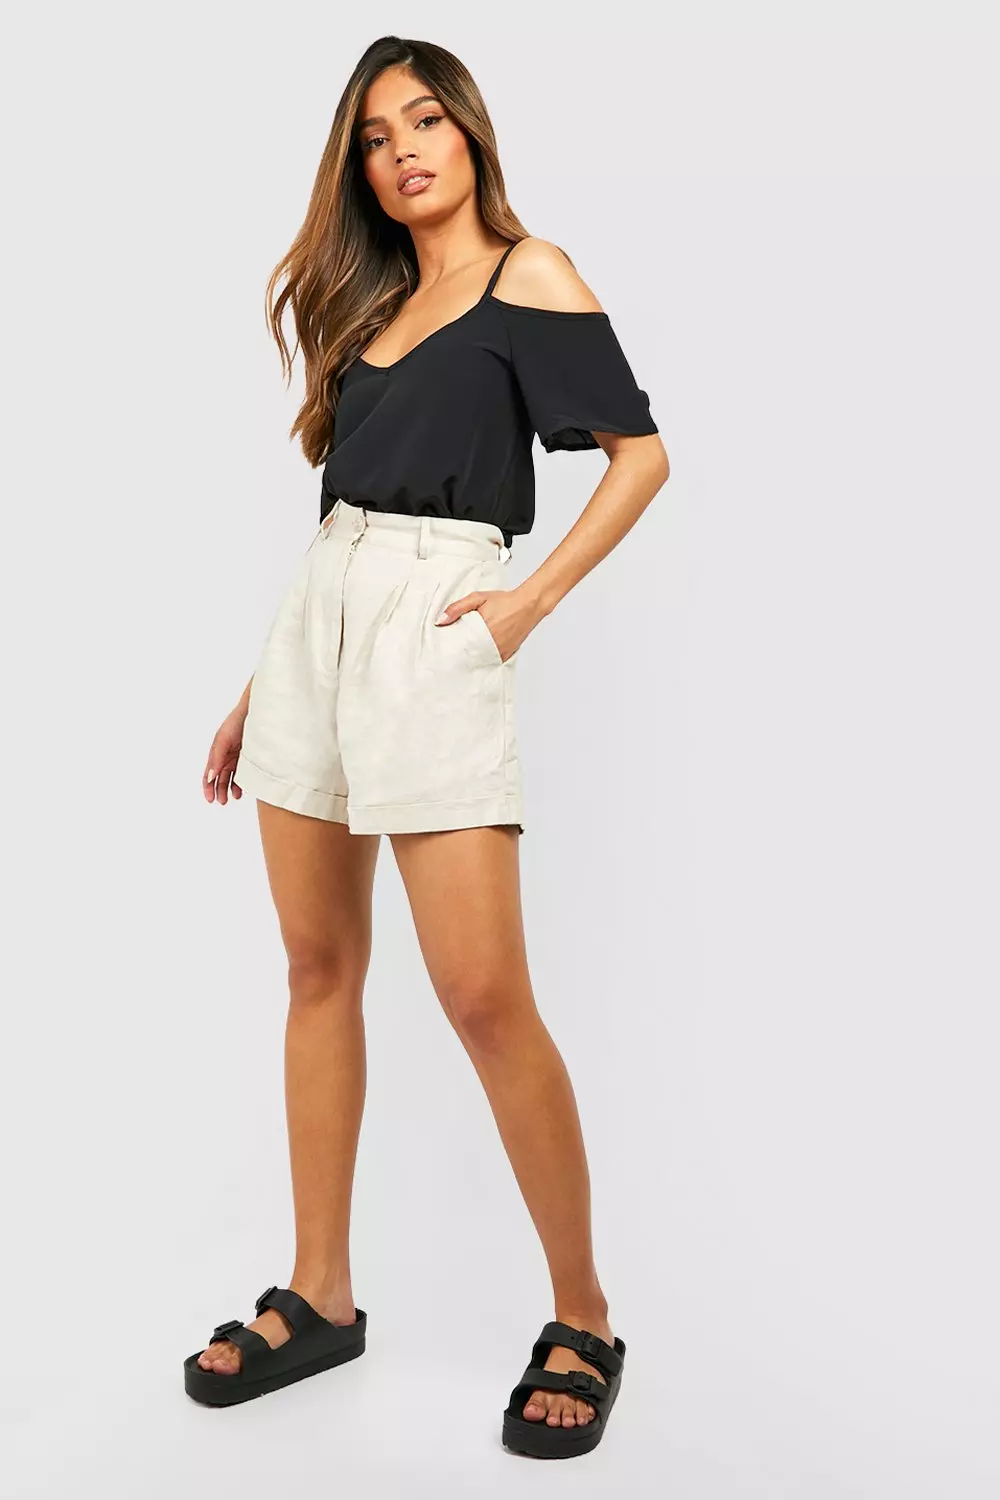 Woven Strappy Open Shoulder Top